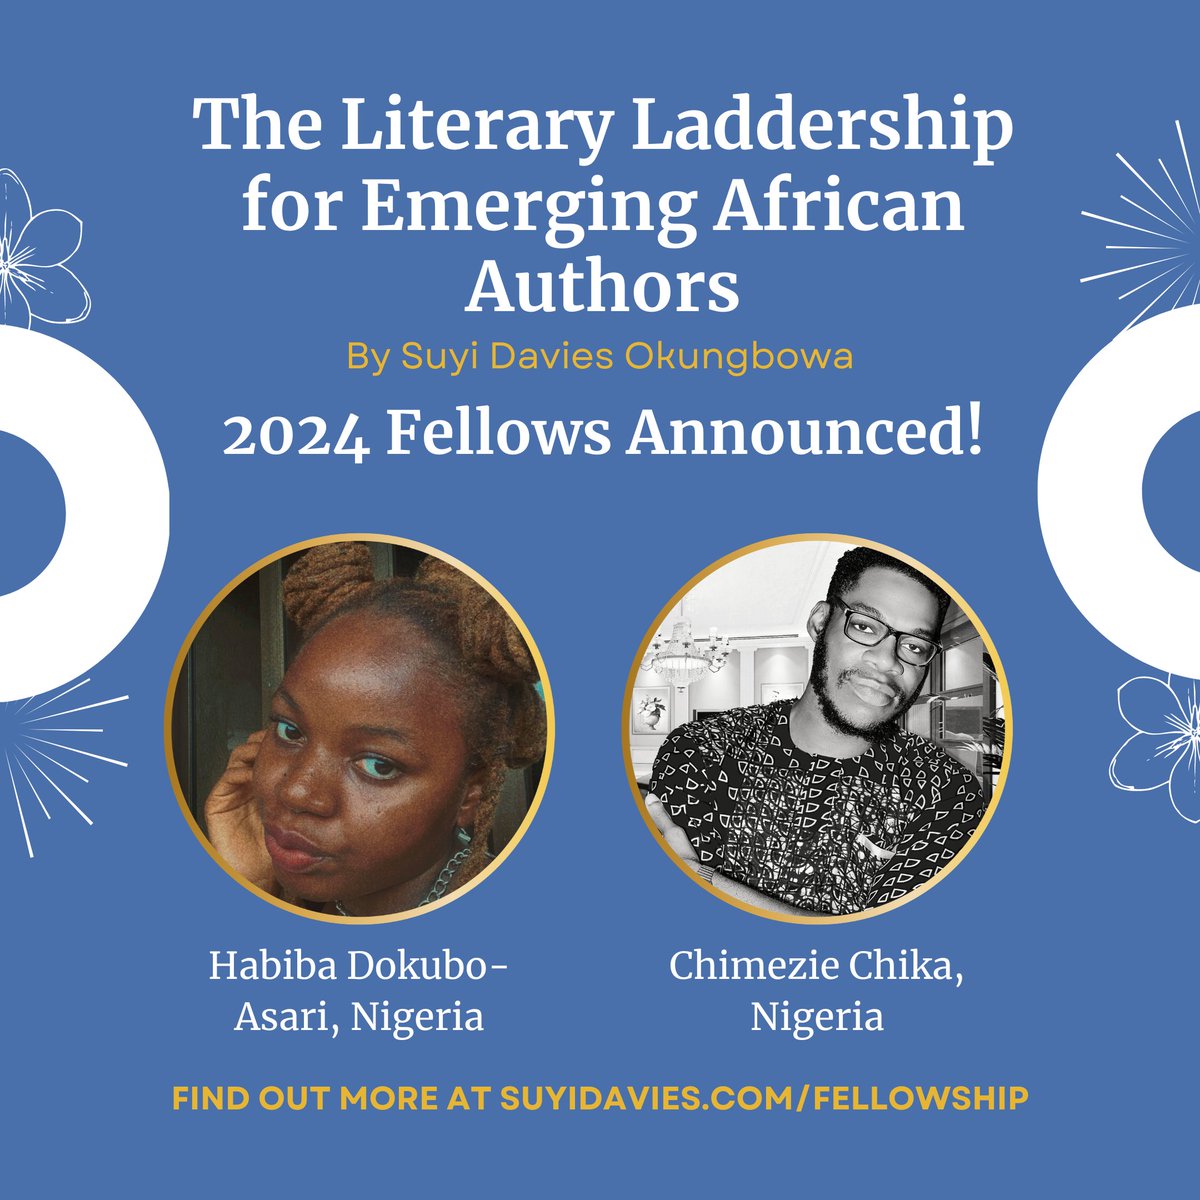 Some overwhelming news here! Happy to announce that I have been selected as a 2024 fellow of the @suyidavies' The Literary Laddership for Emerging African Authors. This opportunity will give me space to finish the first draft of my novel-in-progress. suyidavies.com/updates/2024-f…